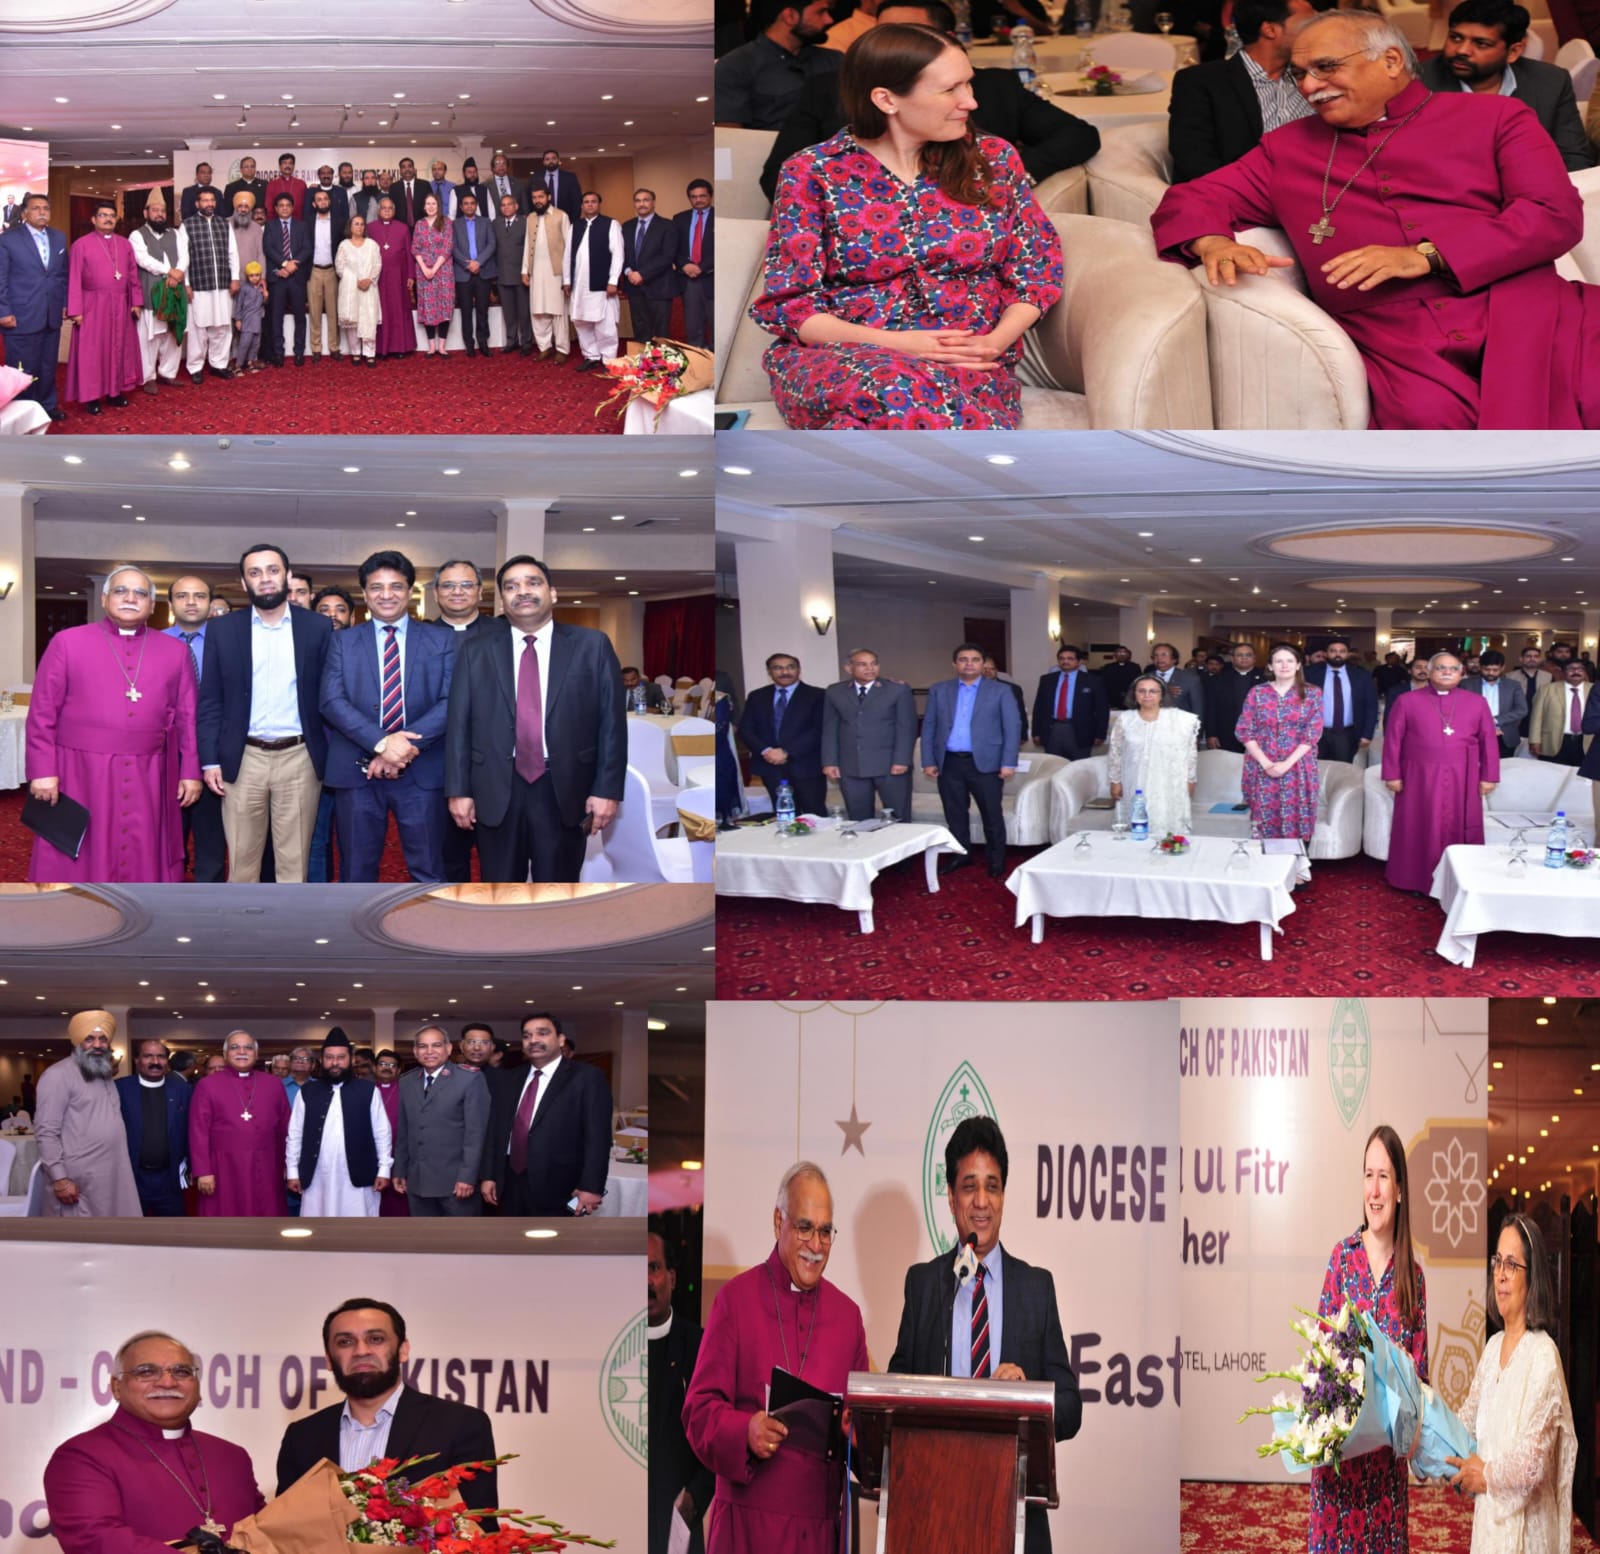 Bishop Azad Marshall Leads the Interfaith Celebration of Easter and Eid-ul-Fitr